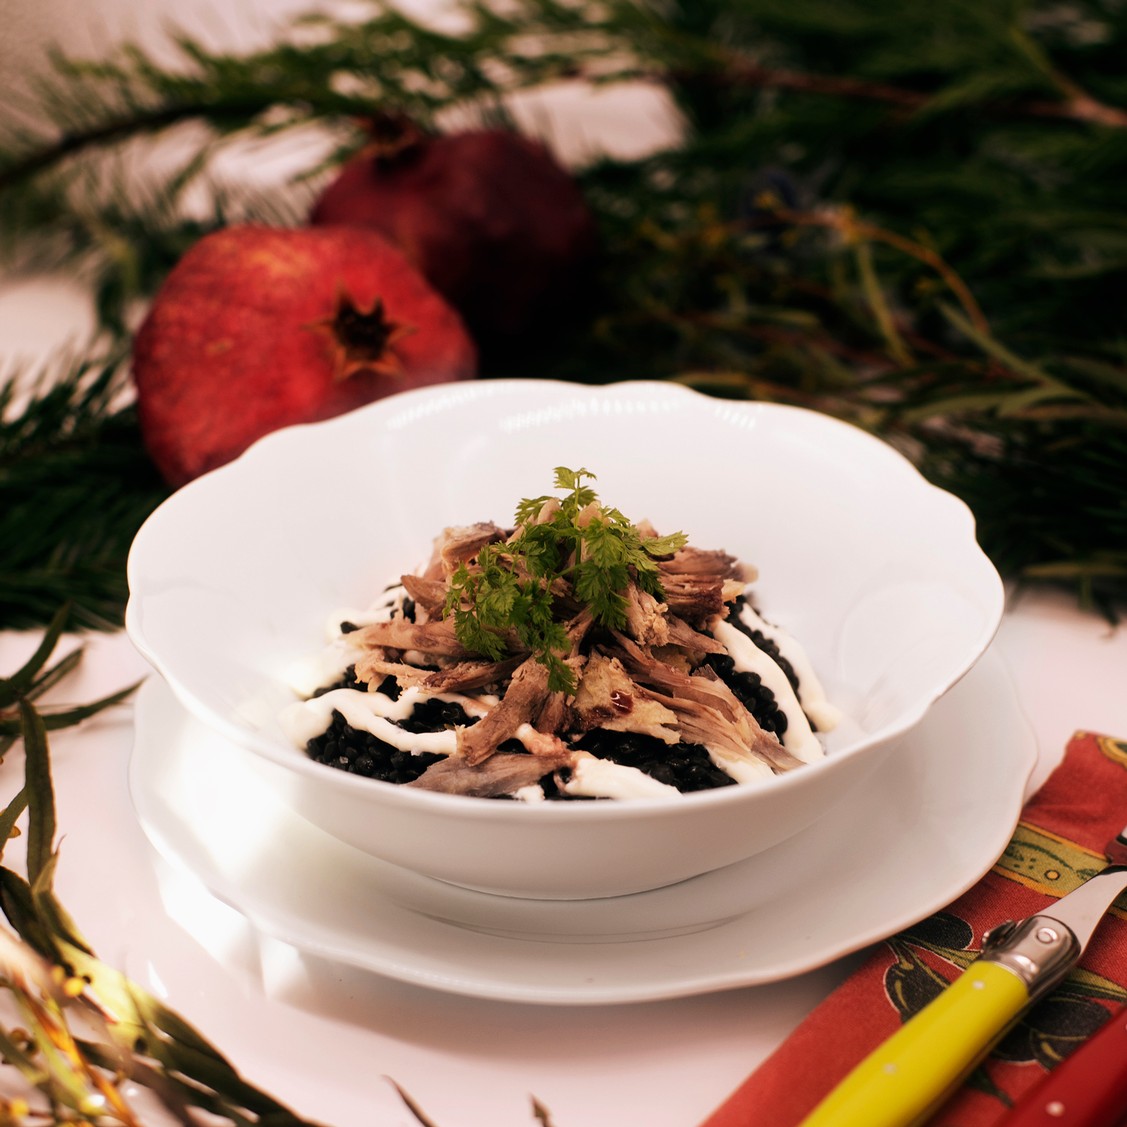 Rosemary-Infused Beluga Lentils with Duck Confit & Pomegranate Gastrique